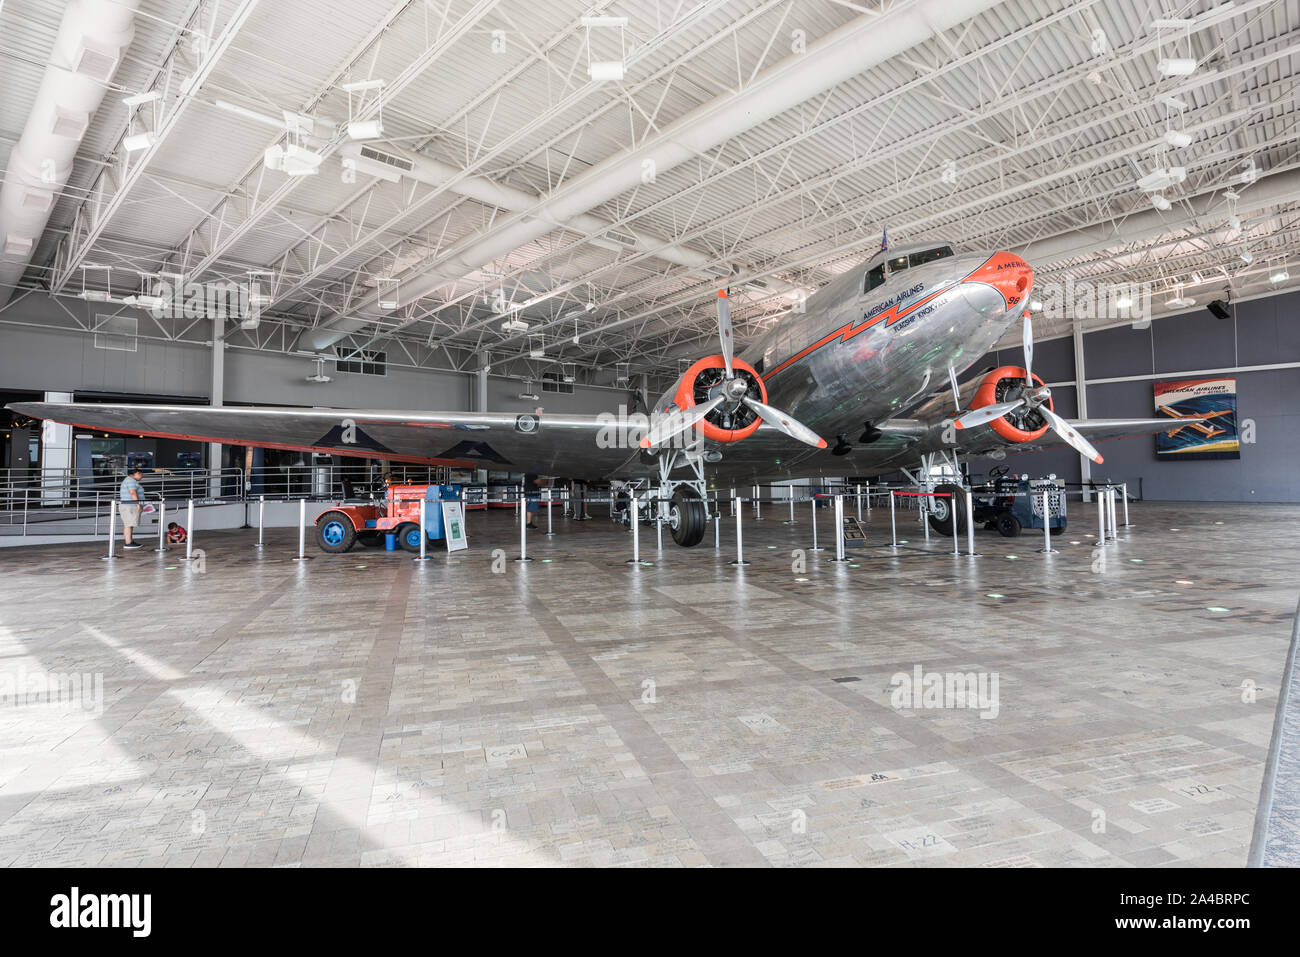 The Flagship Knoxville, a fully restored DC-3 aircraft at the American Airlines C.R. Smith Museum on the campus of the American Airlines Flight Academy, at the southern end of DFW International Airport near the world headquarters of American Airlines Stock Photo